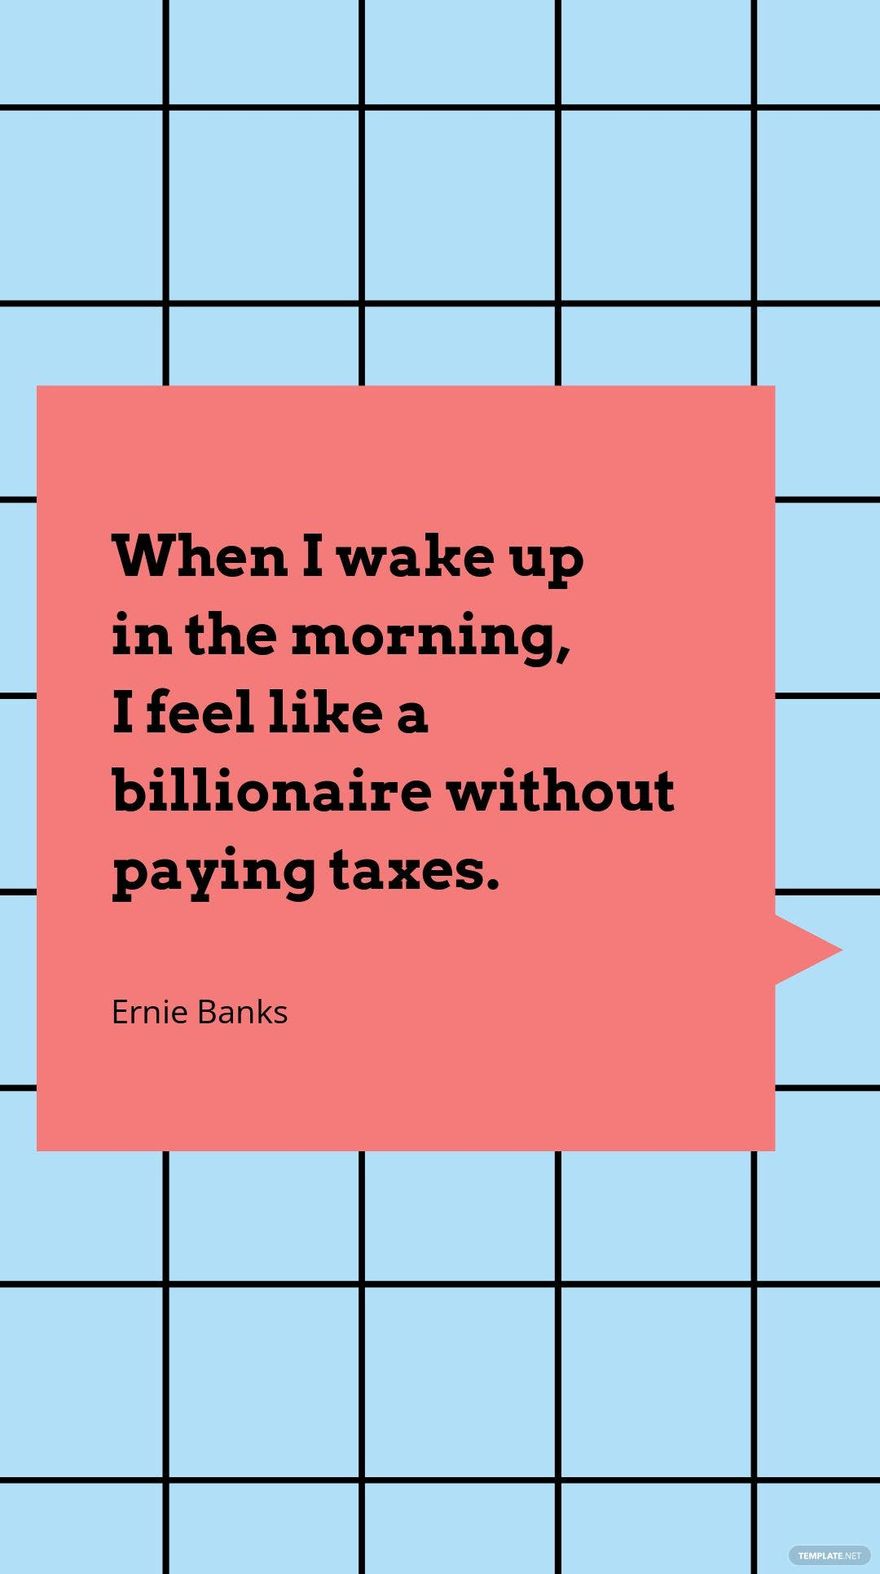 Ernie Banks - When I wake up in the morning, I feel like a billionaire without paying taxes.